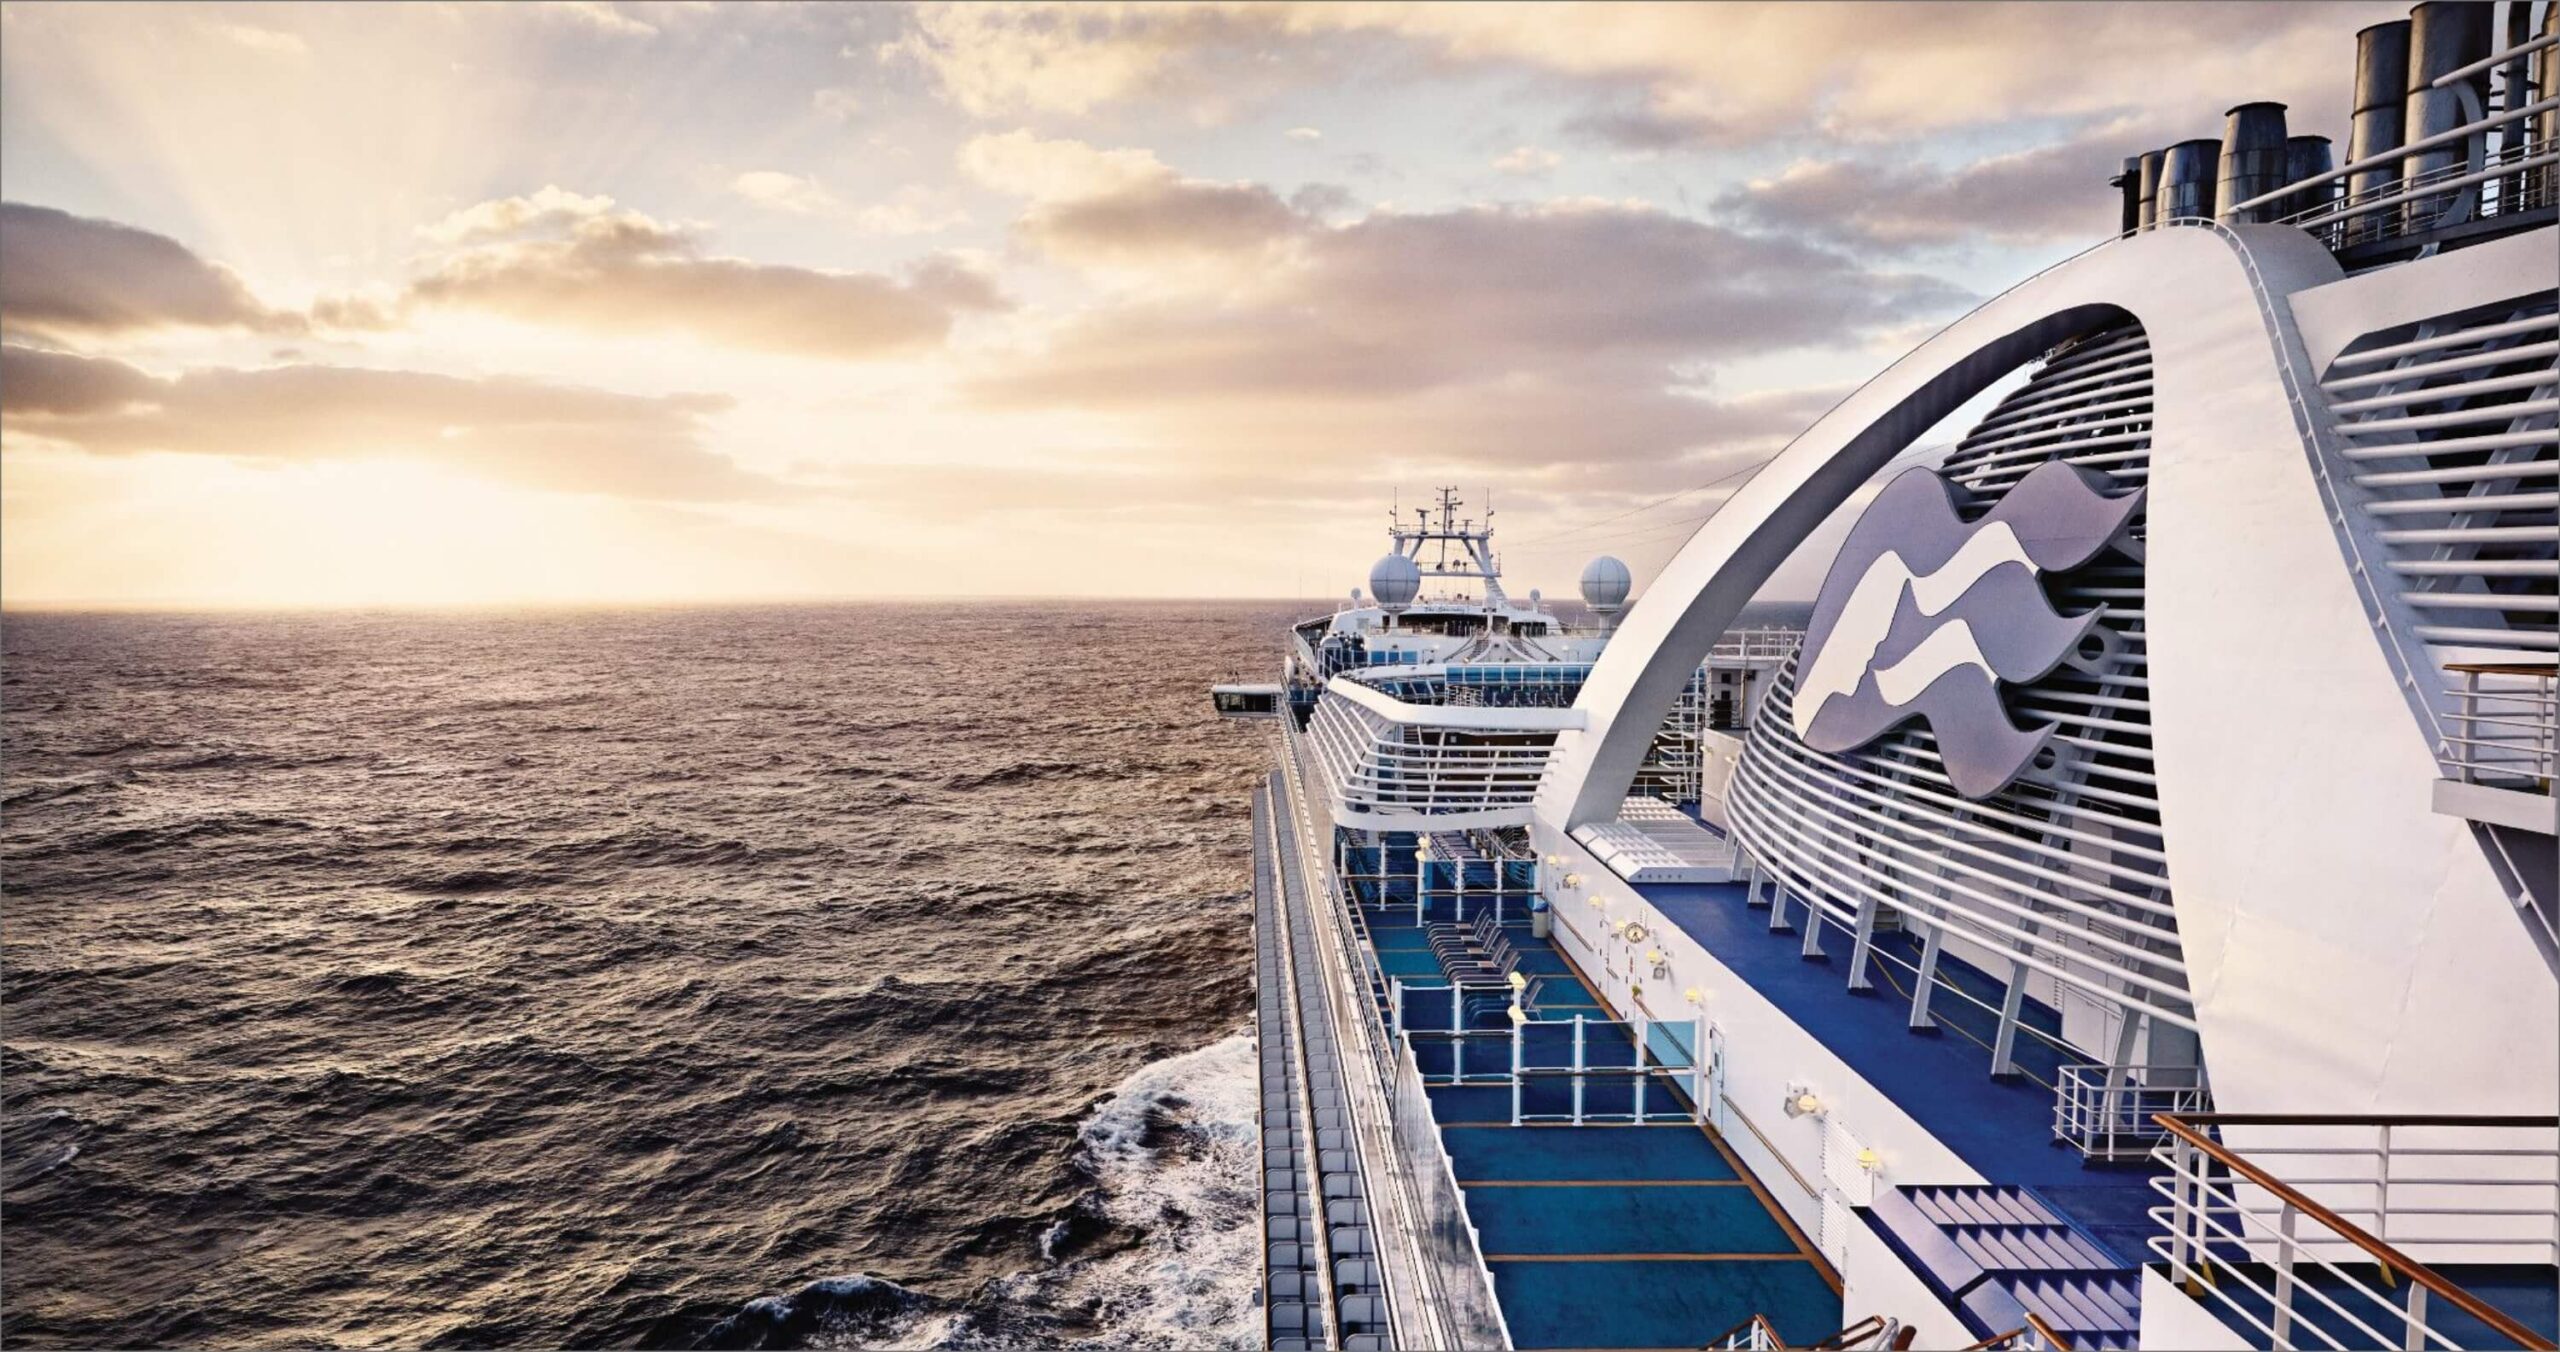 Princess Up to $400 spend onboard